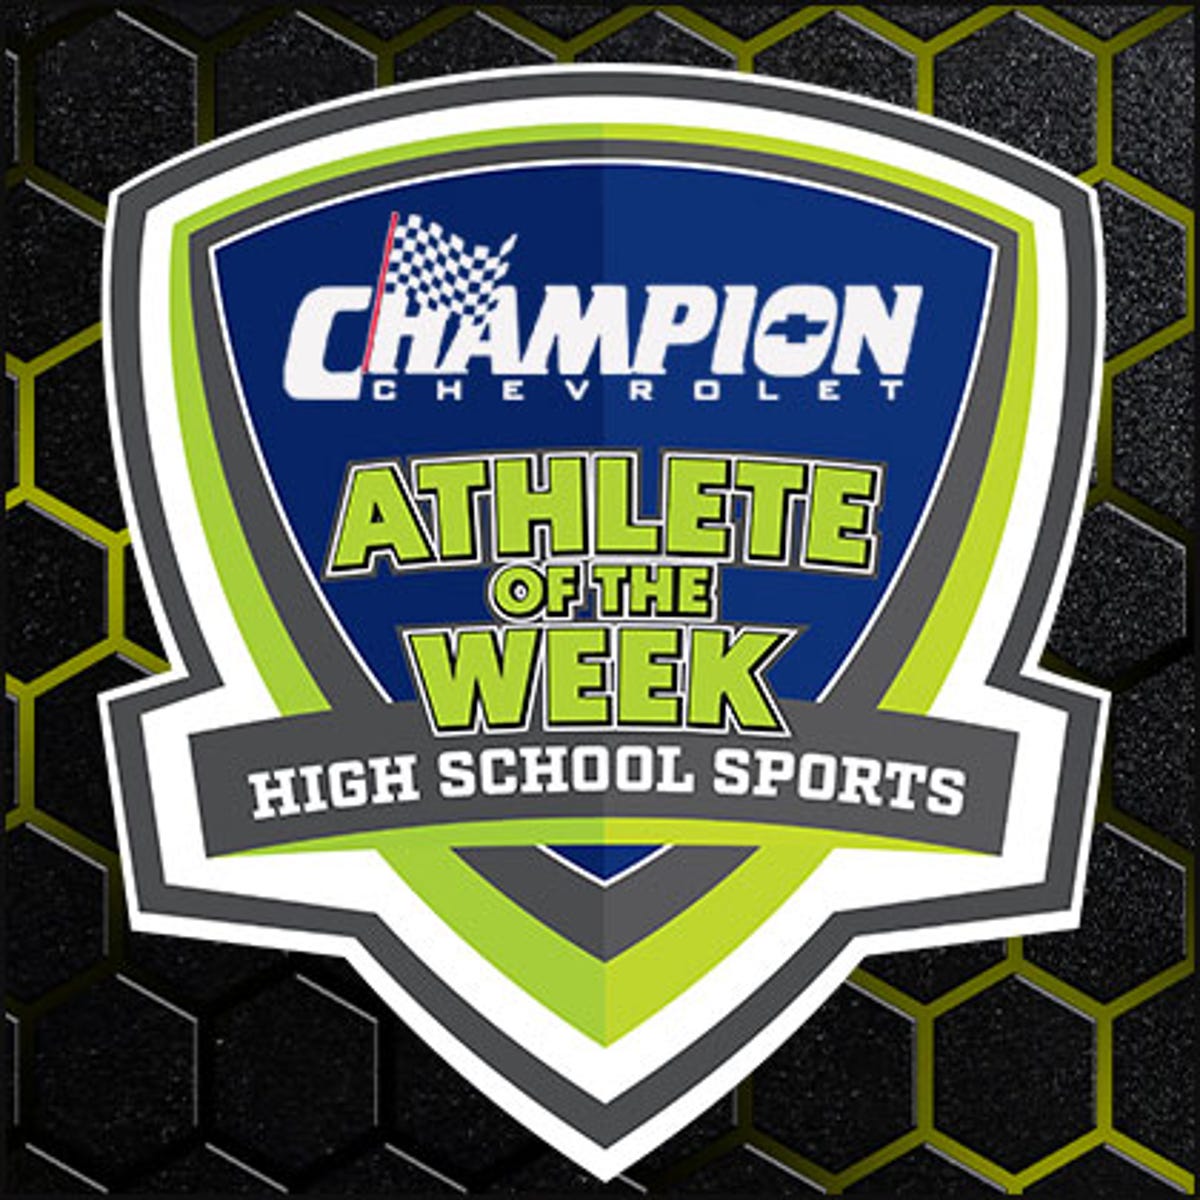 Reno High Senior Zack Silverman Wins Champion Chevrolet Athlete of the Week with 42.5% of Votes